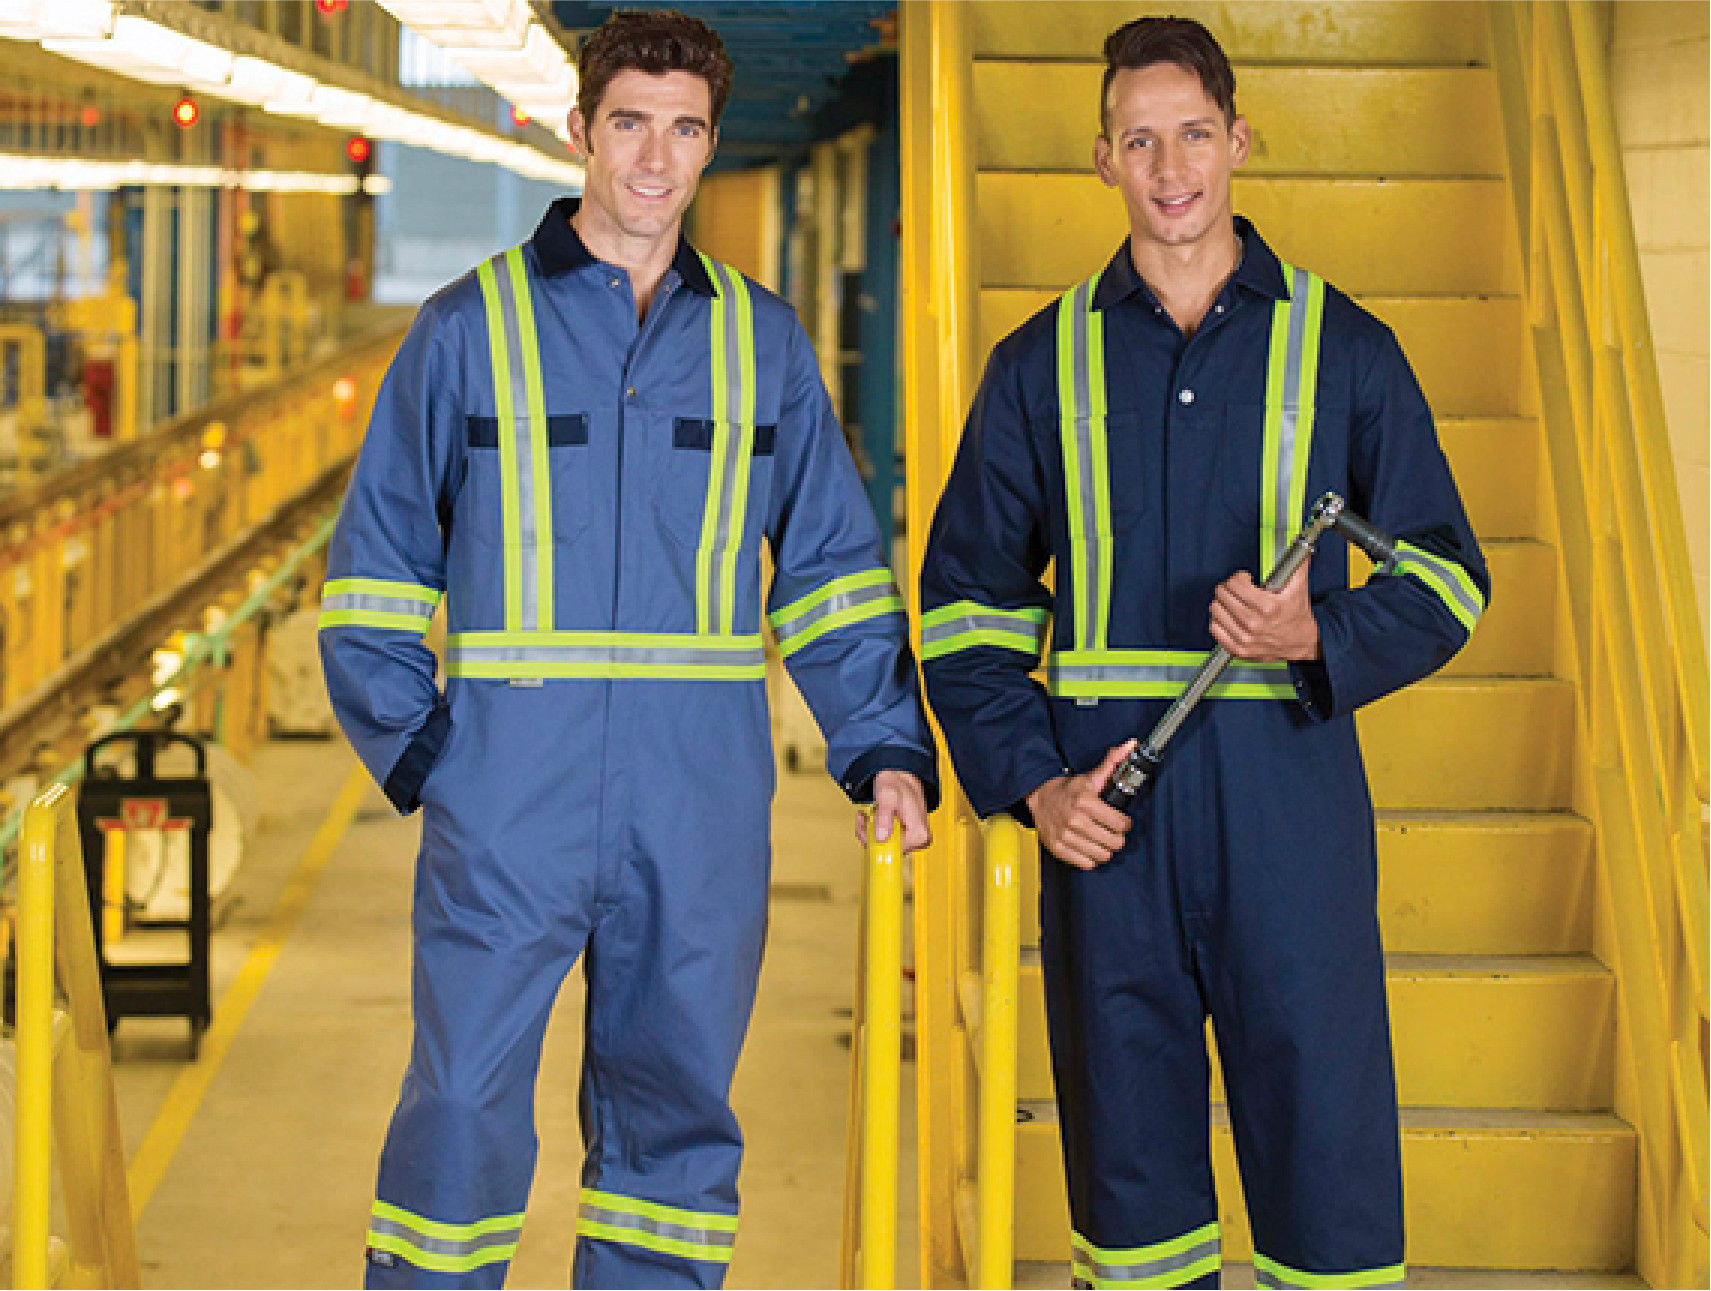 Two industrial workers wearing hi-visibility shirts and pants